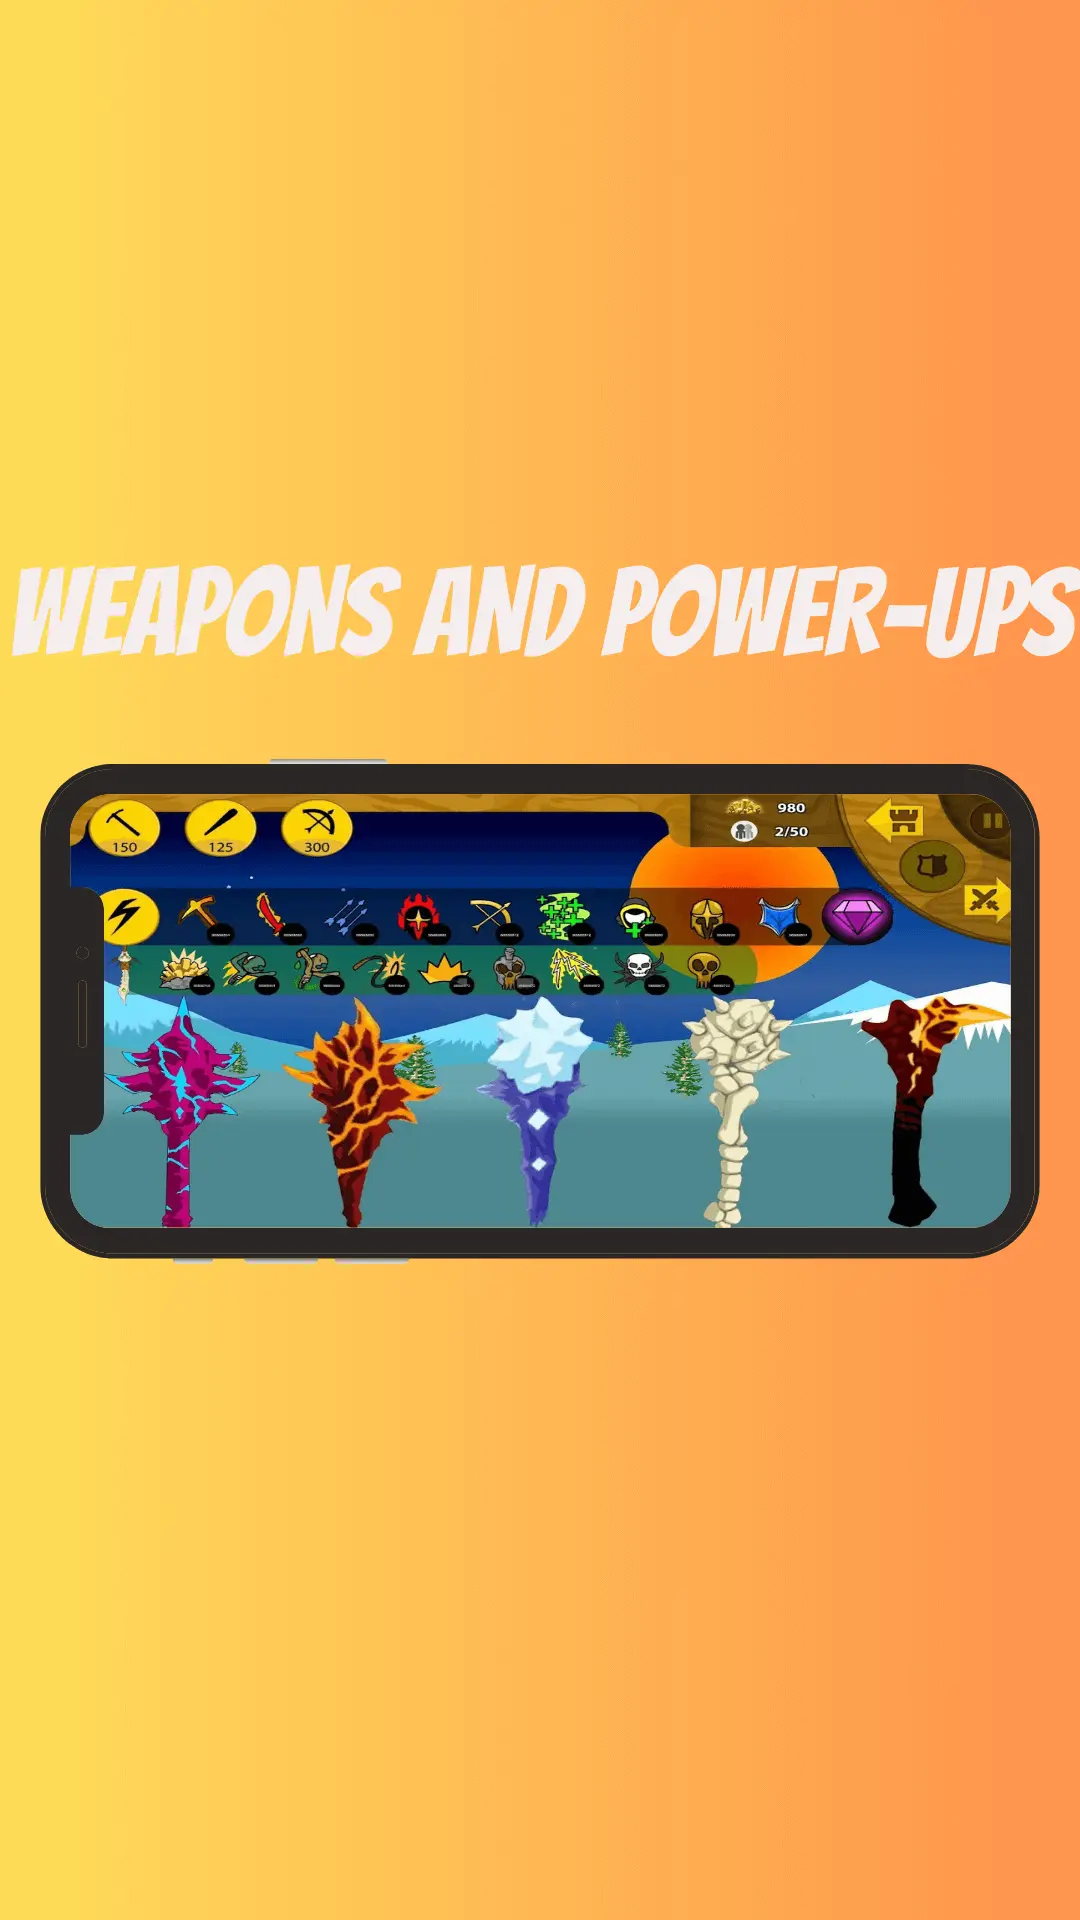 WEAPONS AND POWER-UPS